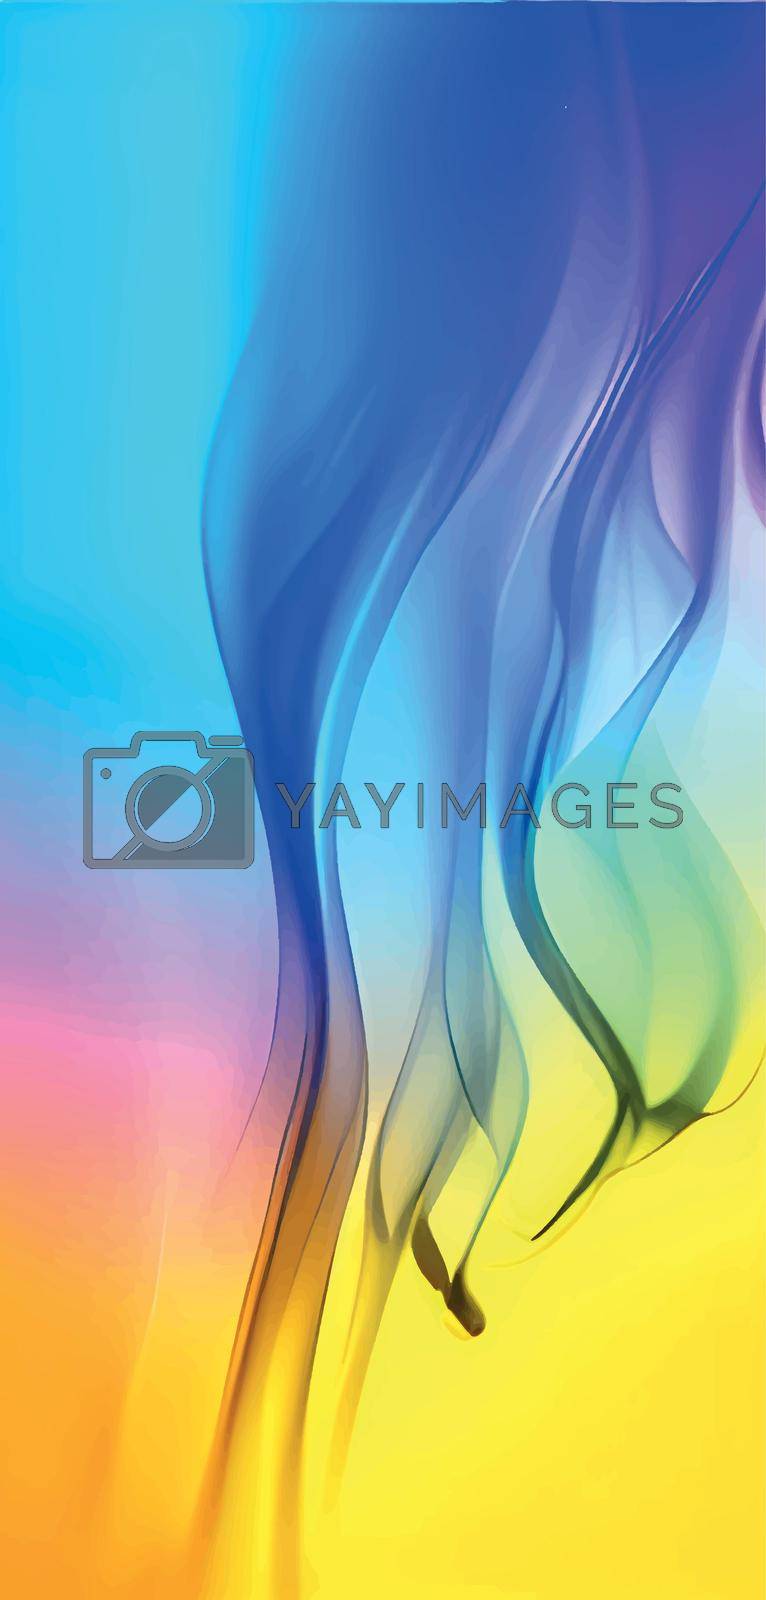 Royalty free image of abstract colorful background with smoke by yilmazsavaskandag